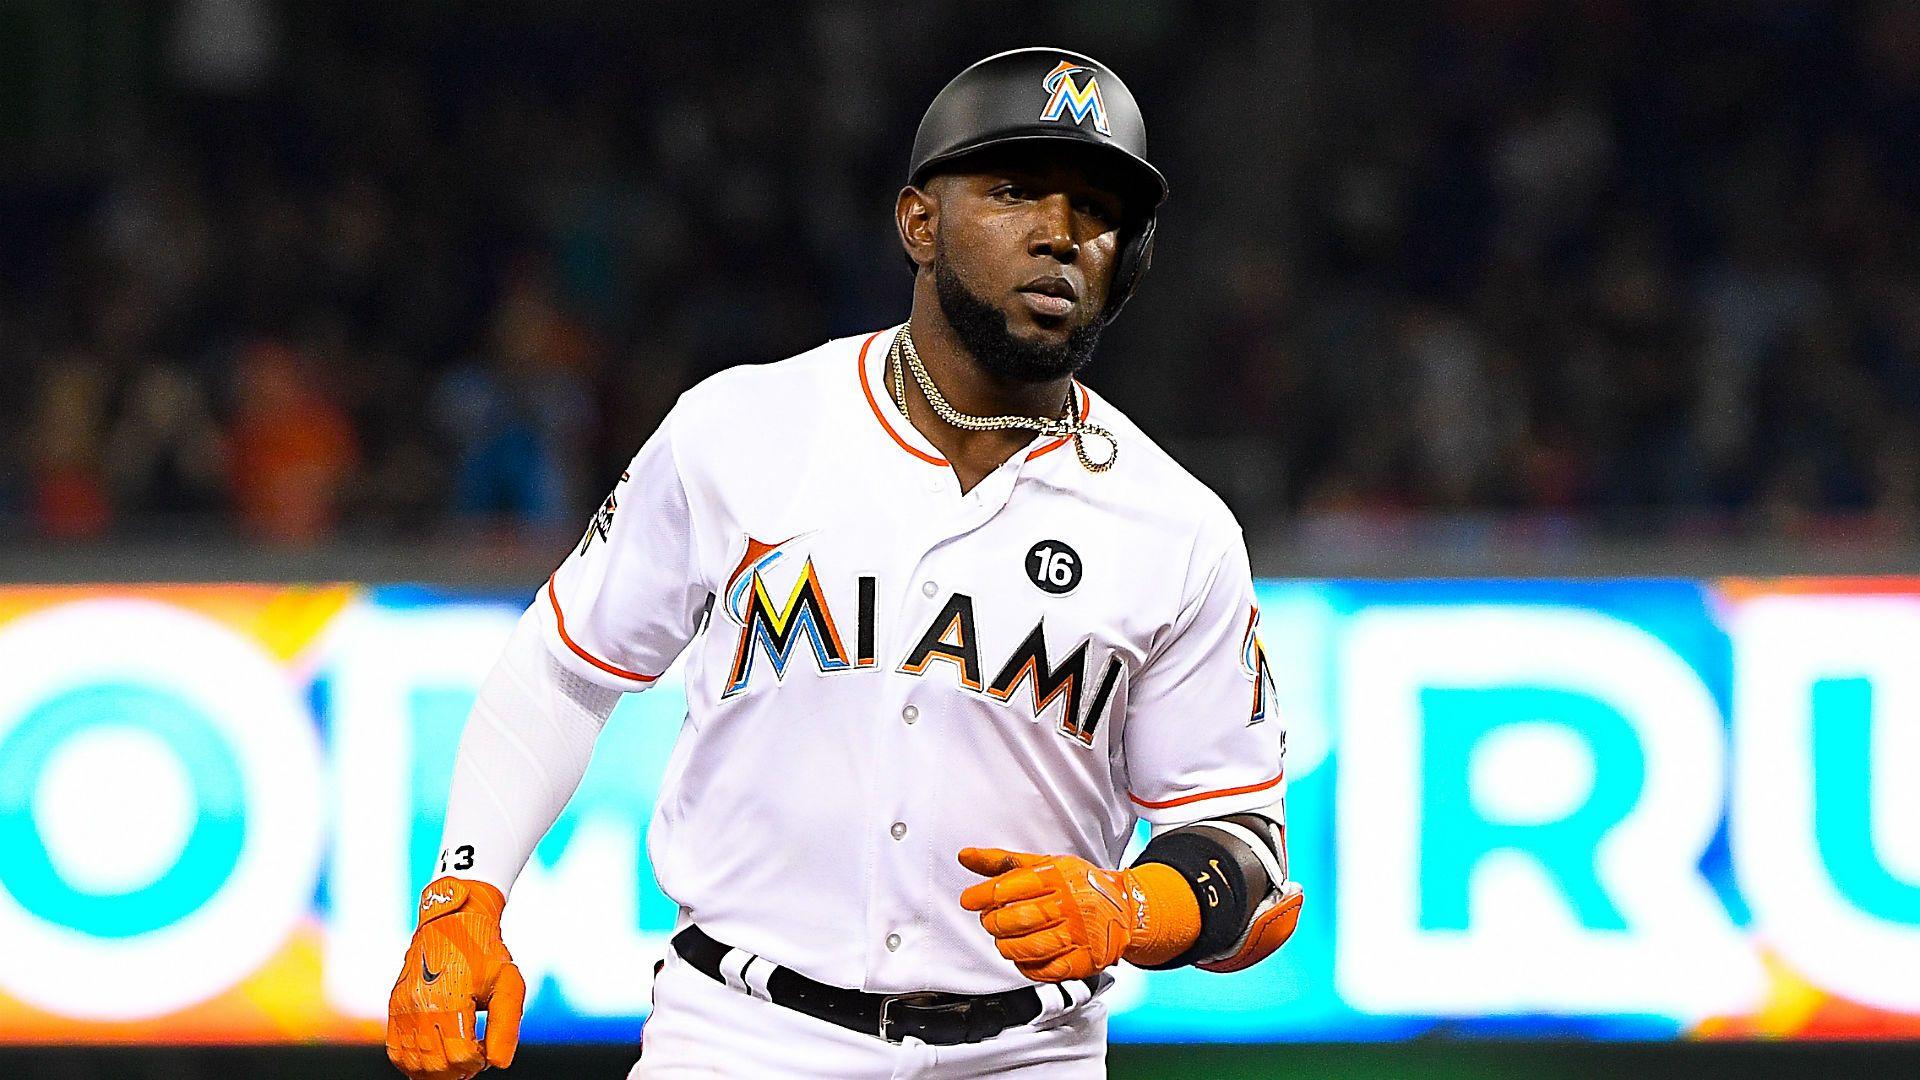 Marcell Ozuna Wallpapers - Wallpaper Cave